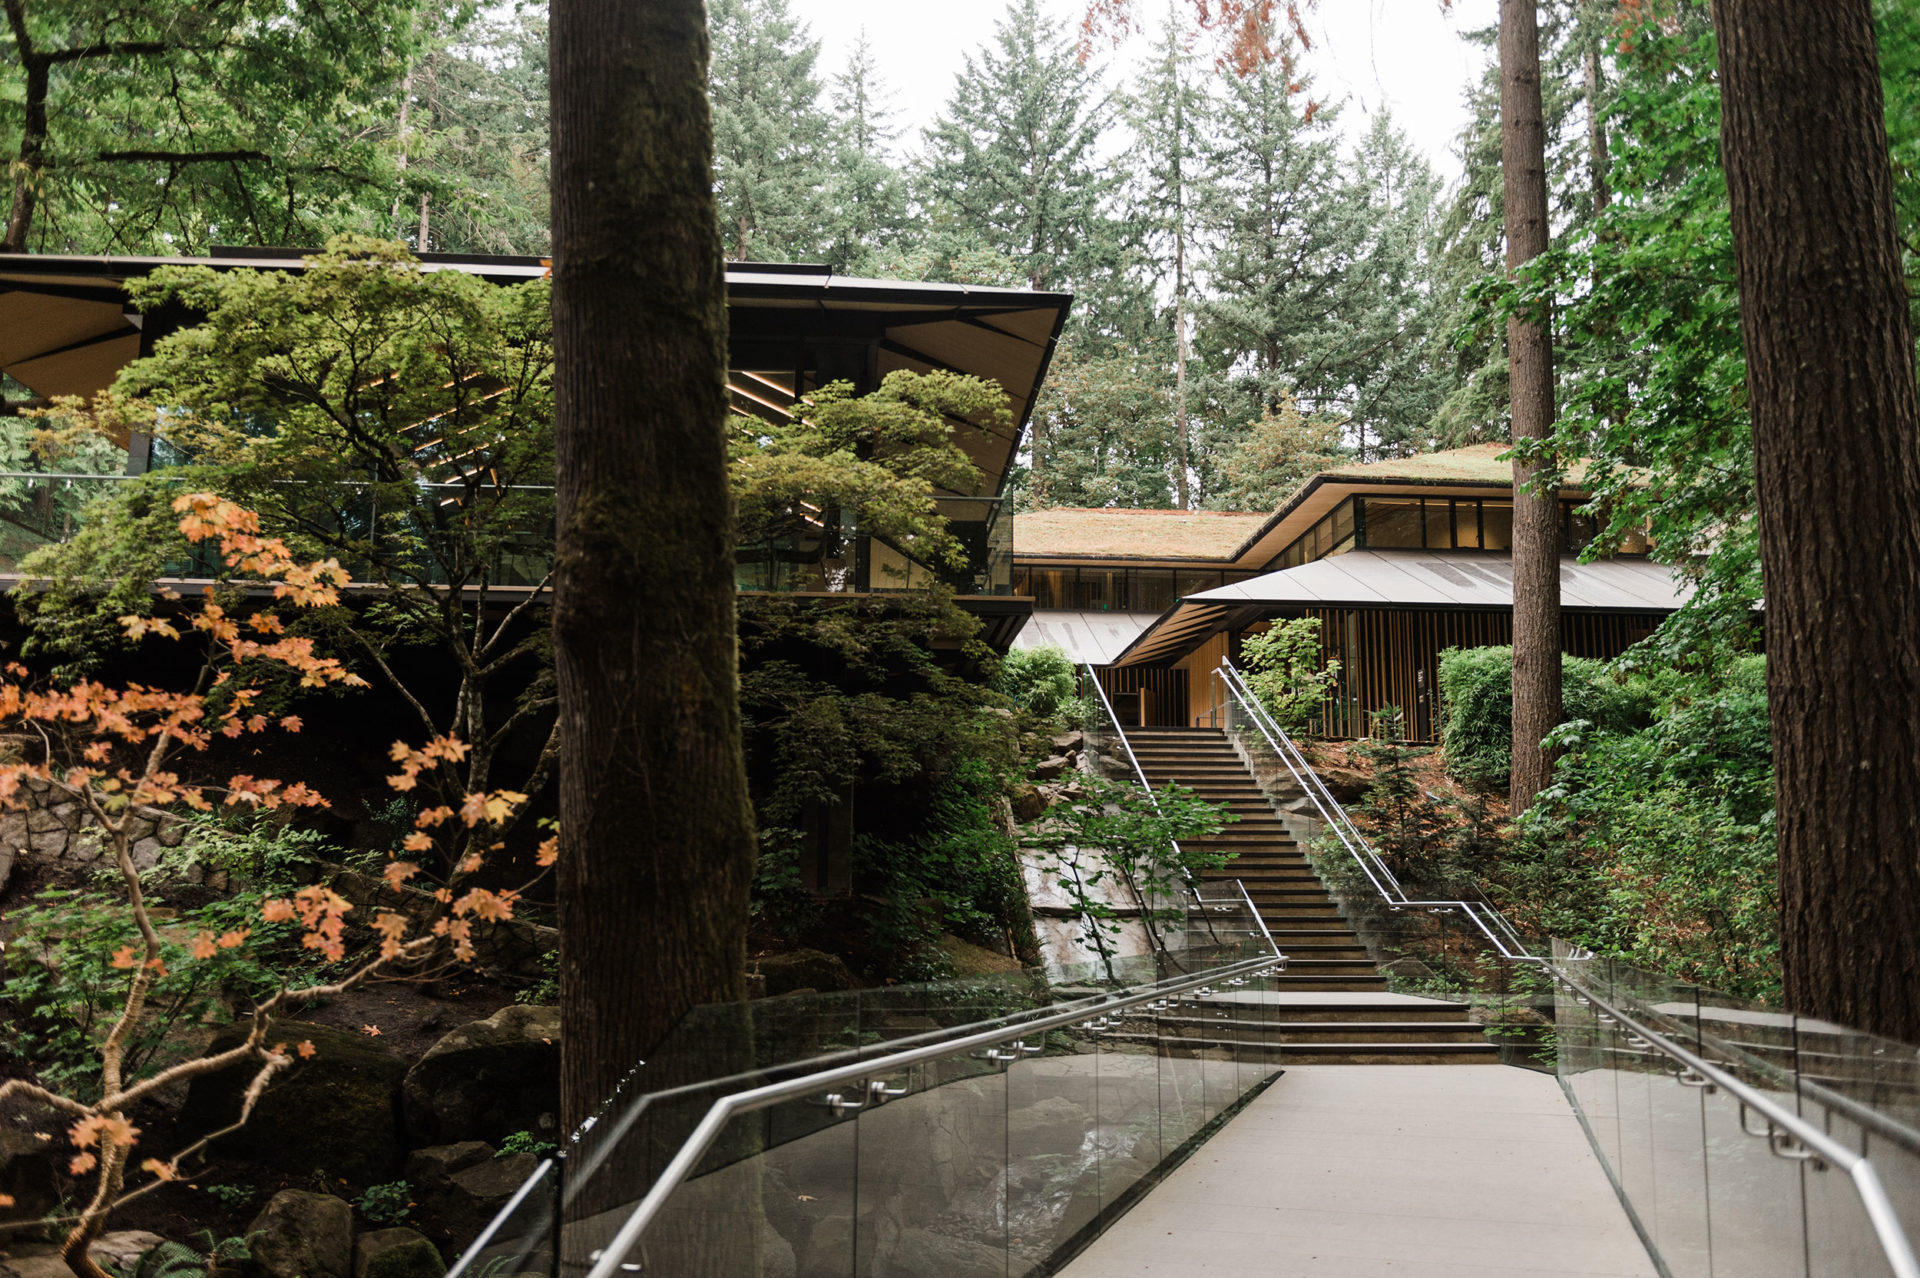 House in the forest, with path lined w/glass and stairs leading up to it.